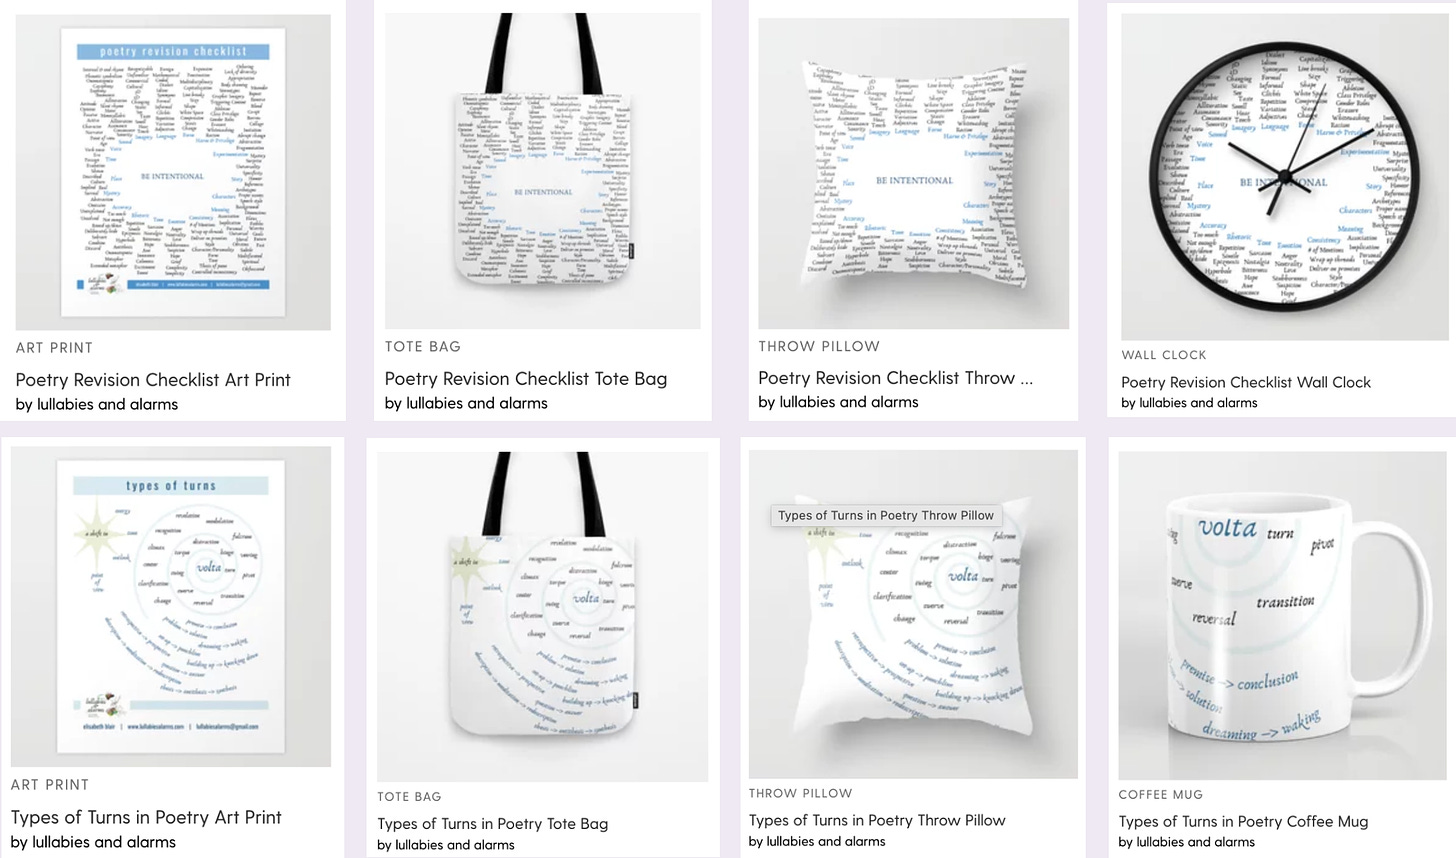 two rows of four product photos each, featuring posters, totes, pillows, a clock, and a mug, each with one of two poetry charts printed on them